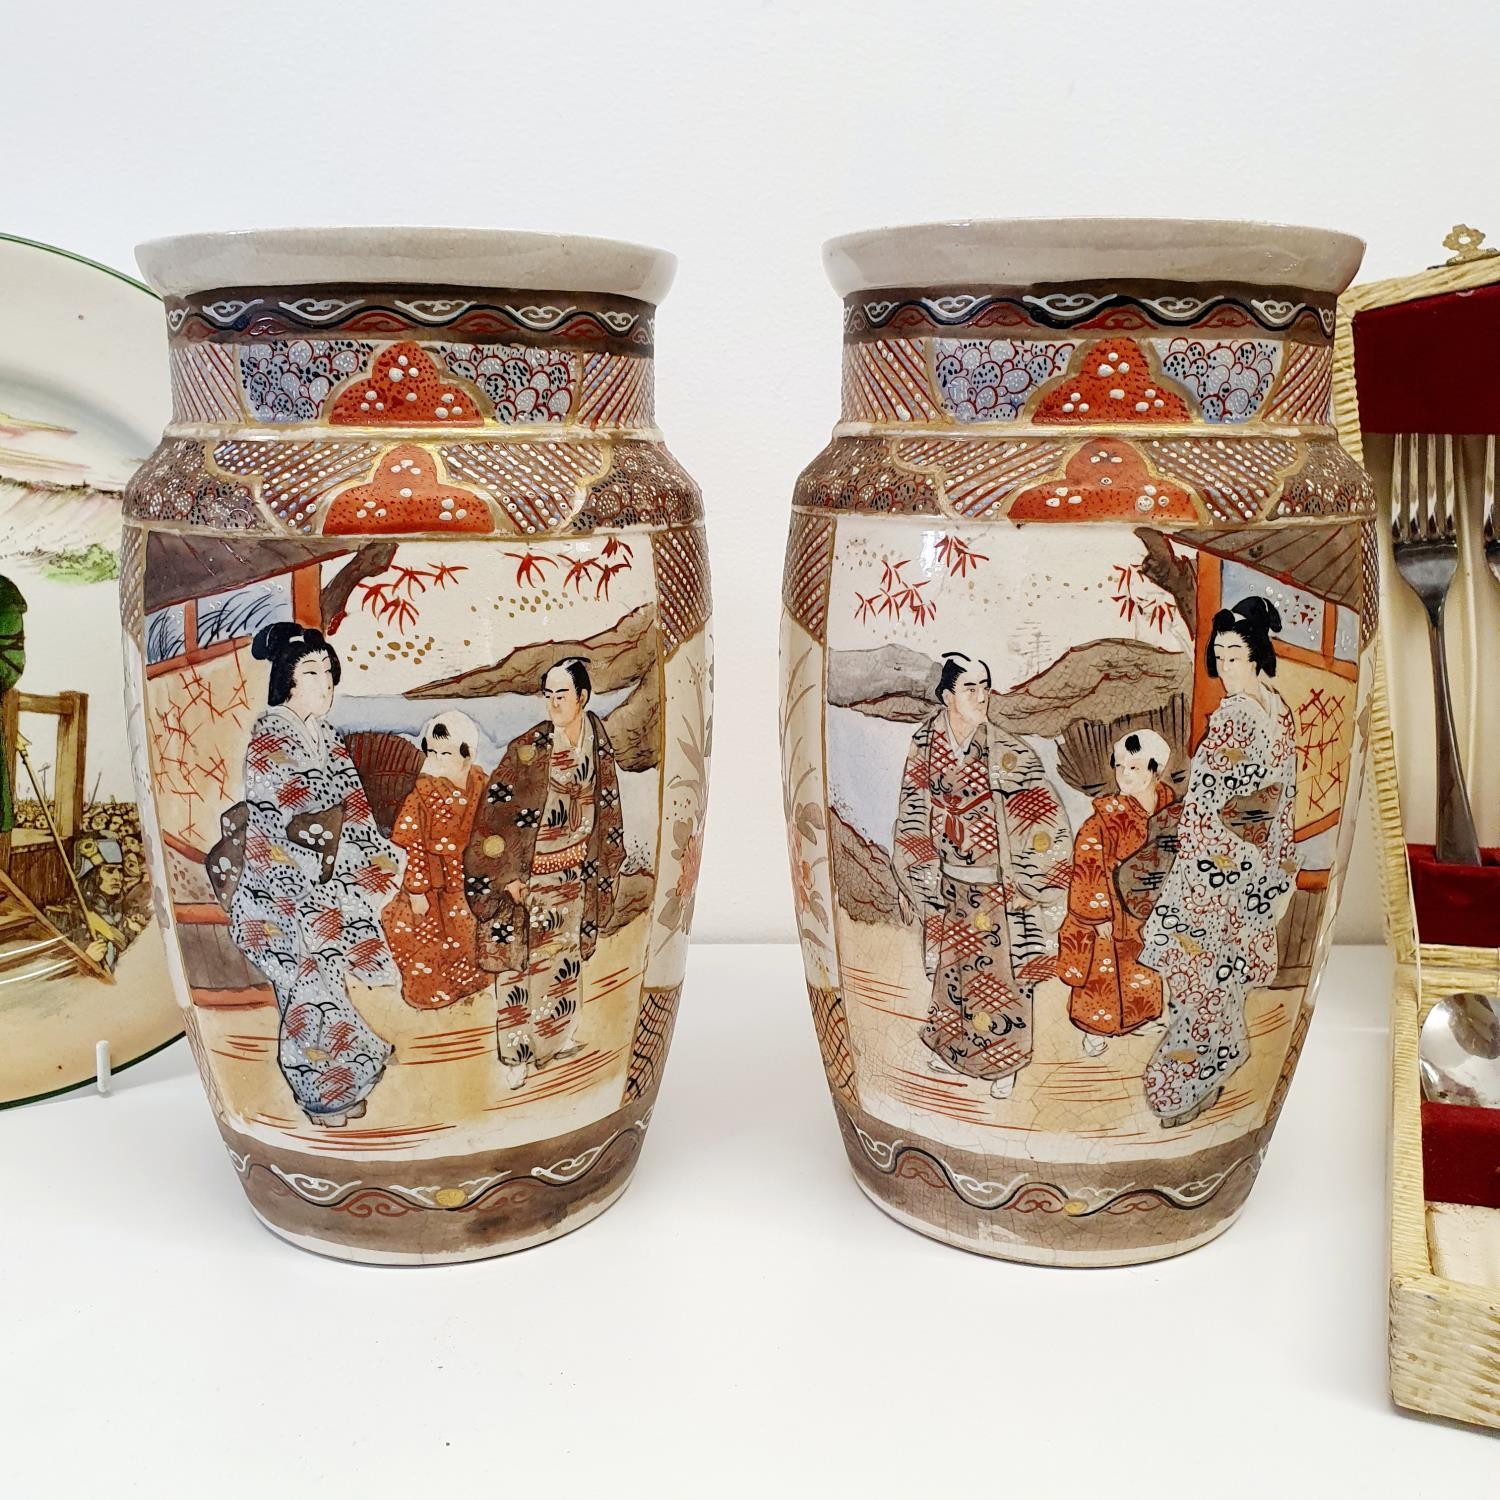 A pair of Satsuma vases, 24 cm high, a Royal Doulton Dickens ware plate, titled Sydney Carton, and a